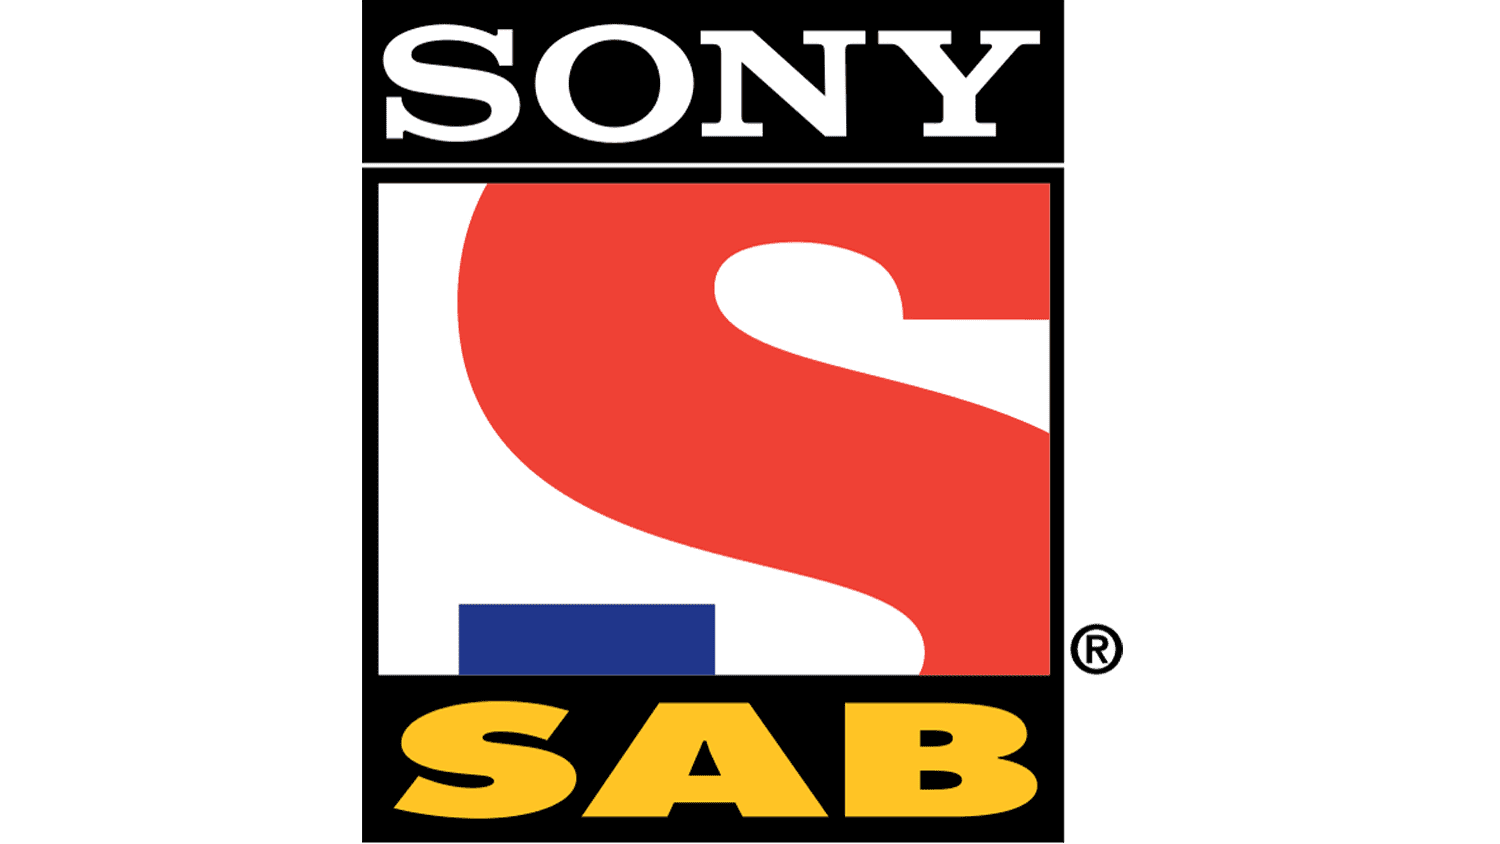 Watch Sony SAB TV Shows, Serials, Epsiodes Online in Full HD on Sony LIV